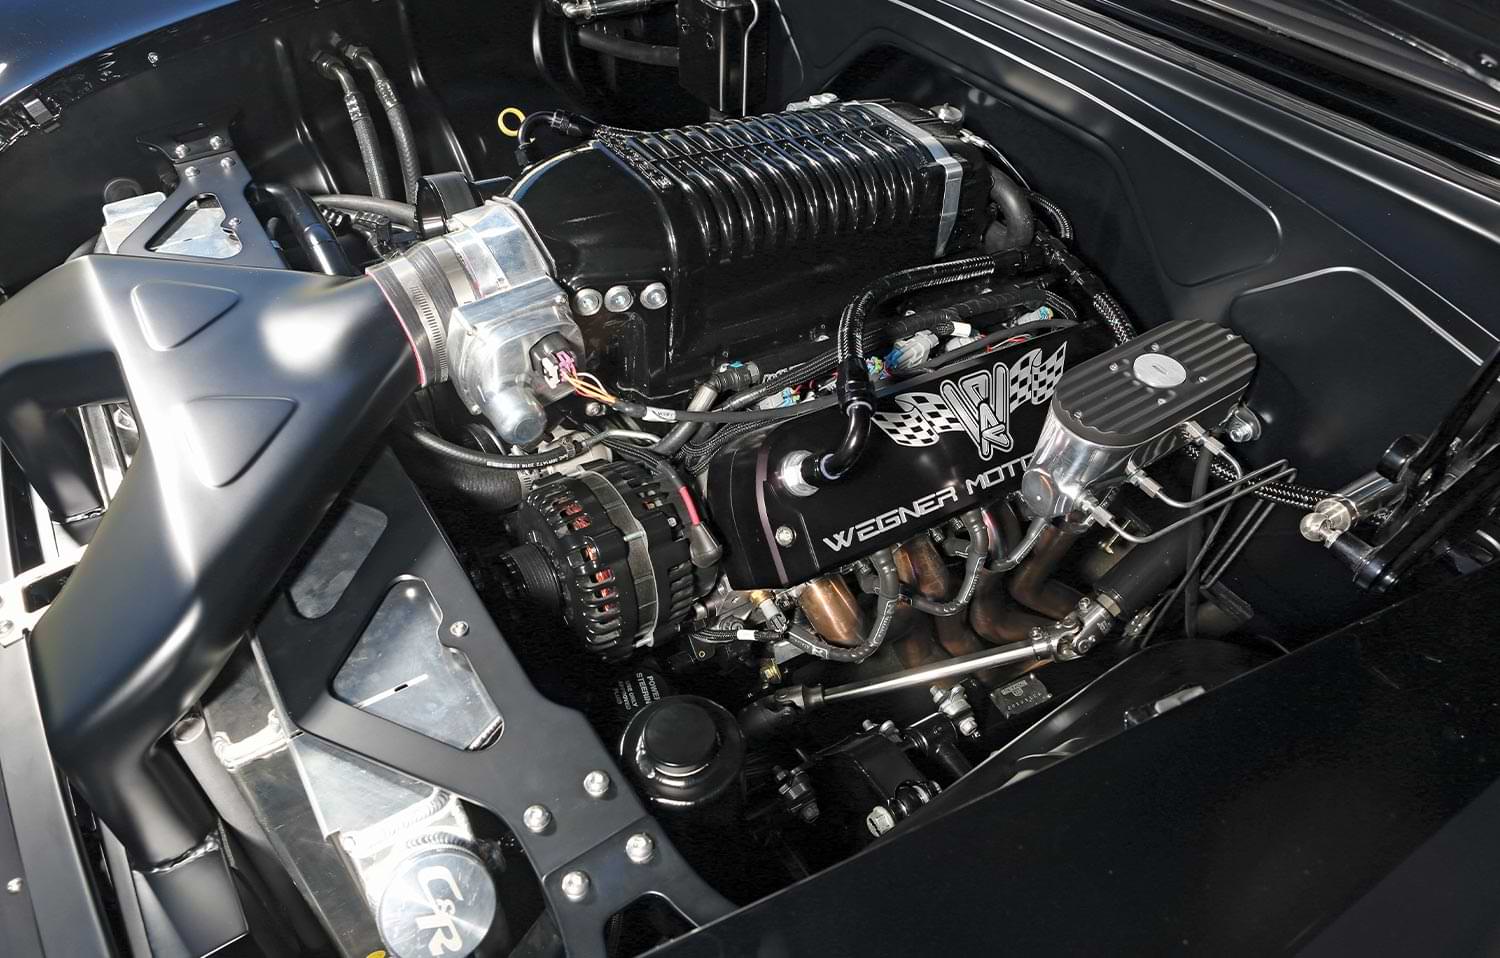 the ’55 Chevy engine